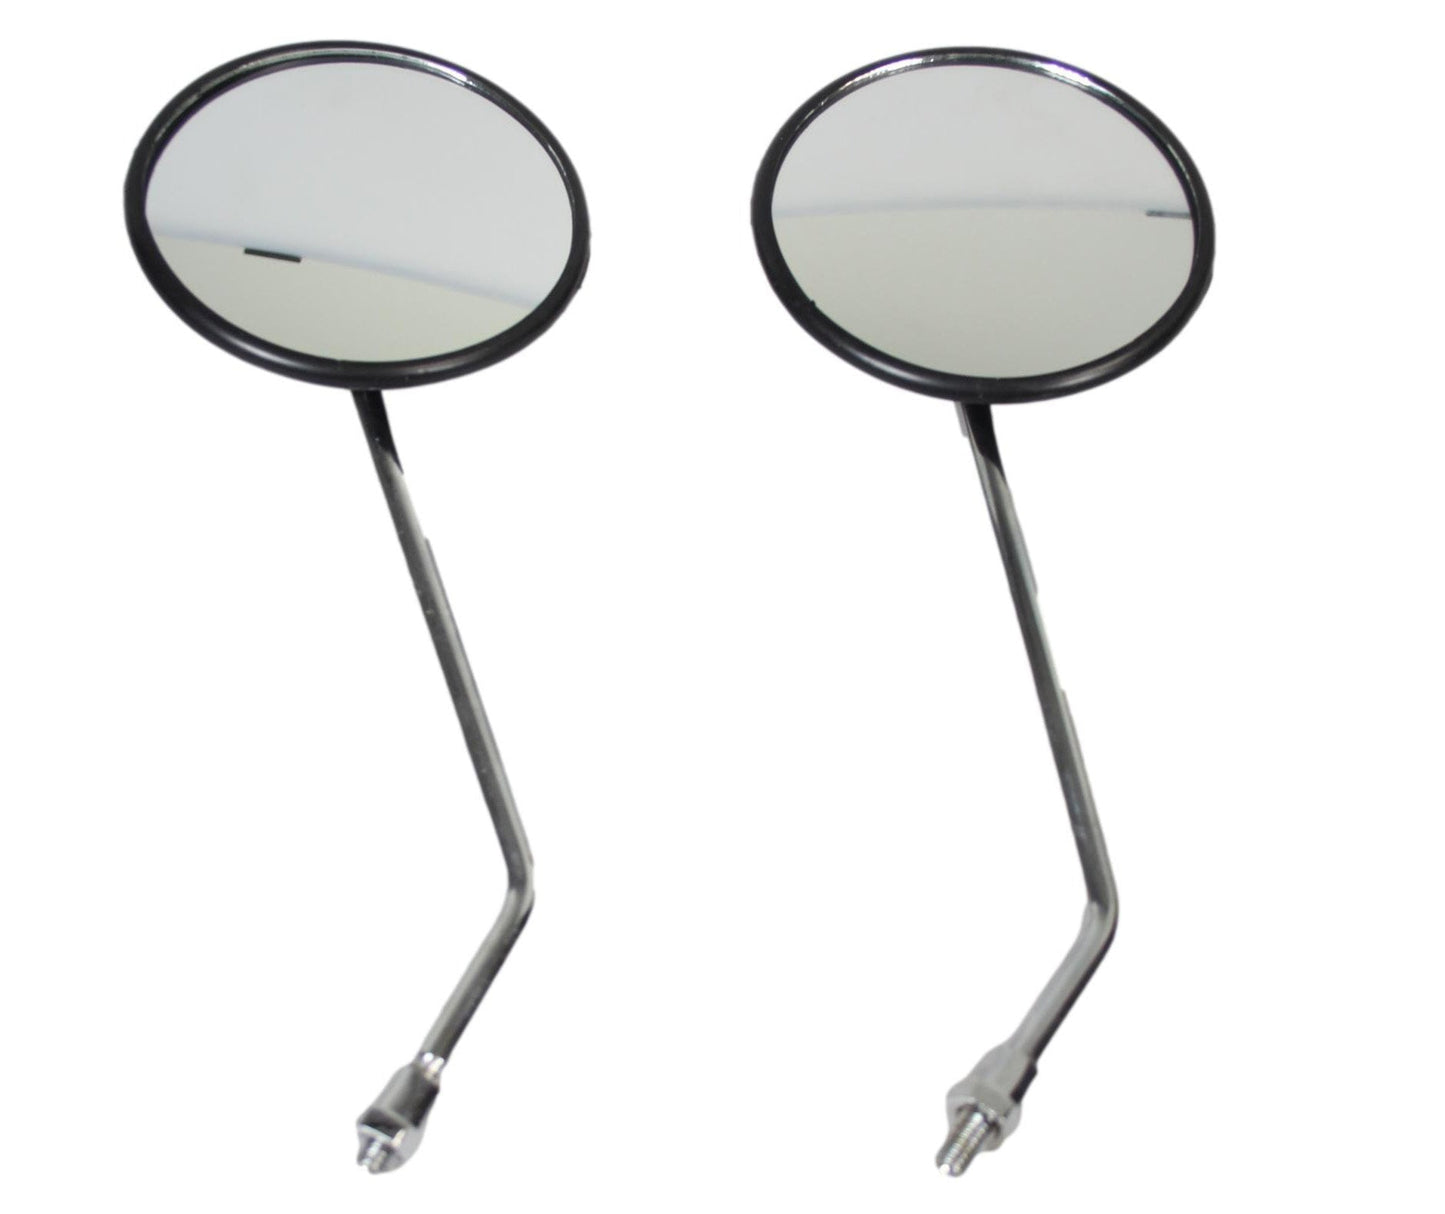 Adjustable Large Bike Mirrors Cycling Convex Safety Mirror 2 Piece 1836 (Parcel Rate)